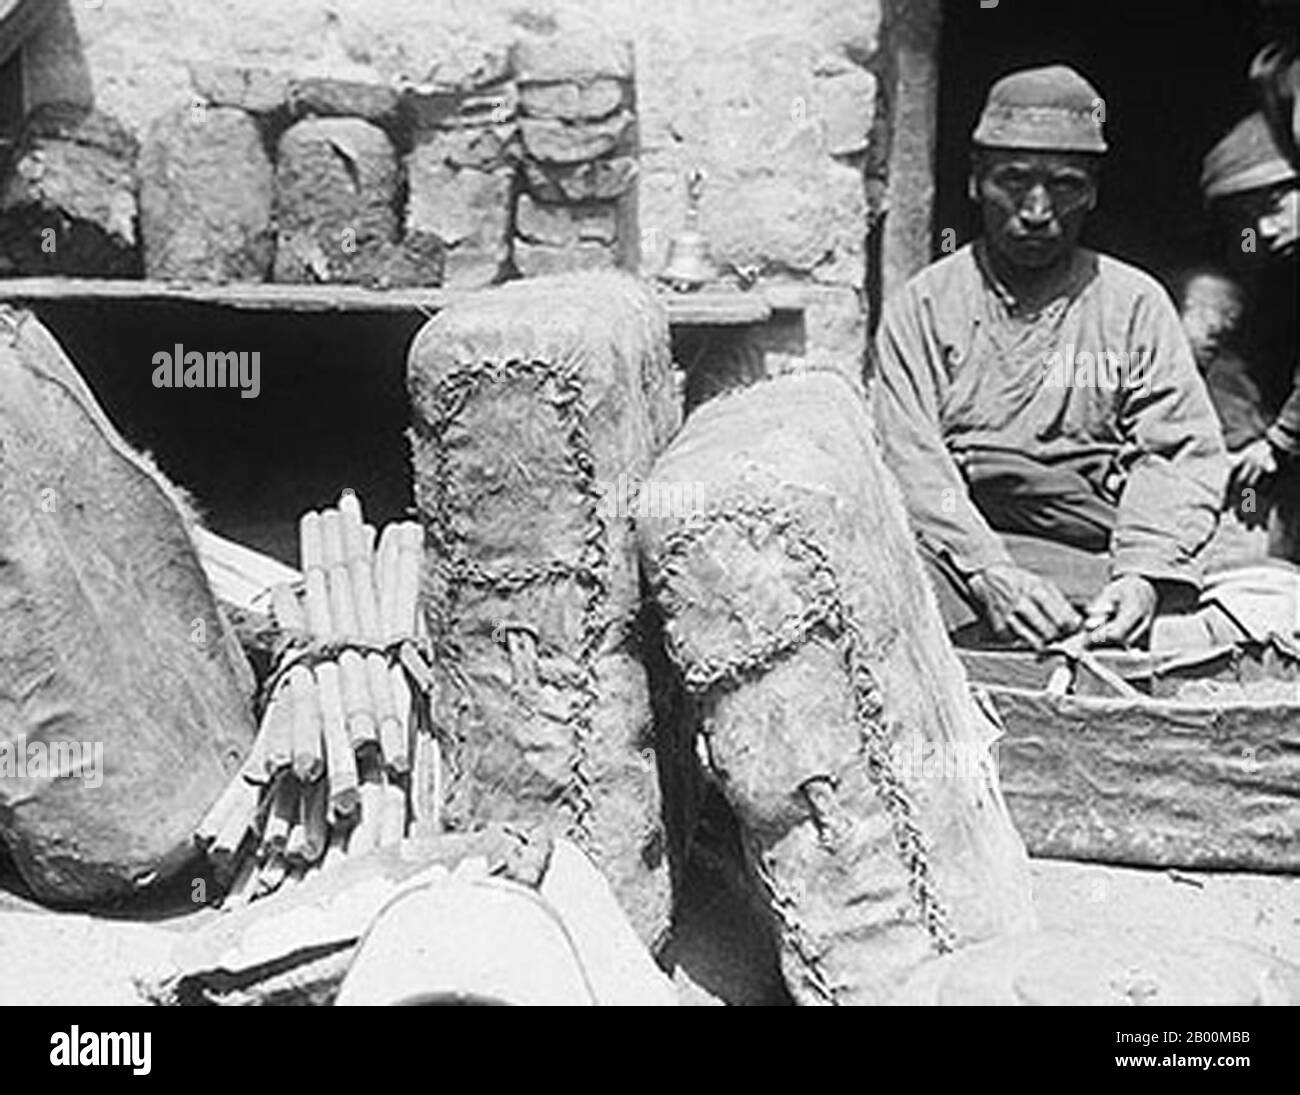 China: Tea shop with bags of brick tea, Lhasa, c.1928.  The Tea Horse Road (Cha Ma Dao) was a network of mule caravan paths winding through the mountains of Yunnan, Sichuan and Tibet in Southwest China.  It is also sometimes referred to as the Southern Silk Road and Ancient Tea and Horse Road. From around a thousand years ago, the Ancient Tea Route was a trade link from Yunnan, one of the first tea-producing regions, to India via Burma, to Tibet, and to central China via Sichuan Province. In addition to tea, the mule caravans carried salt. Stock Photo